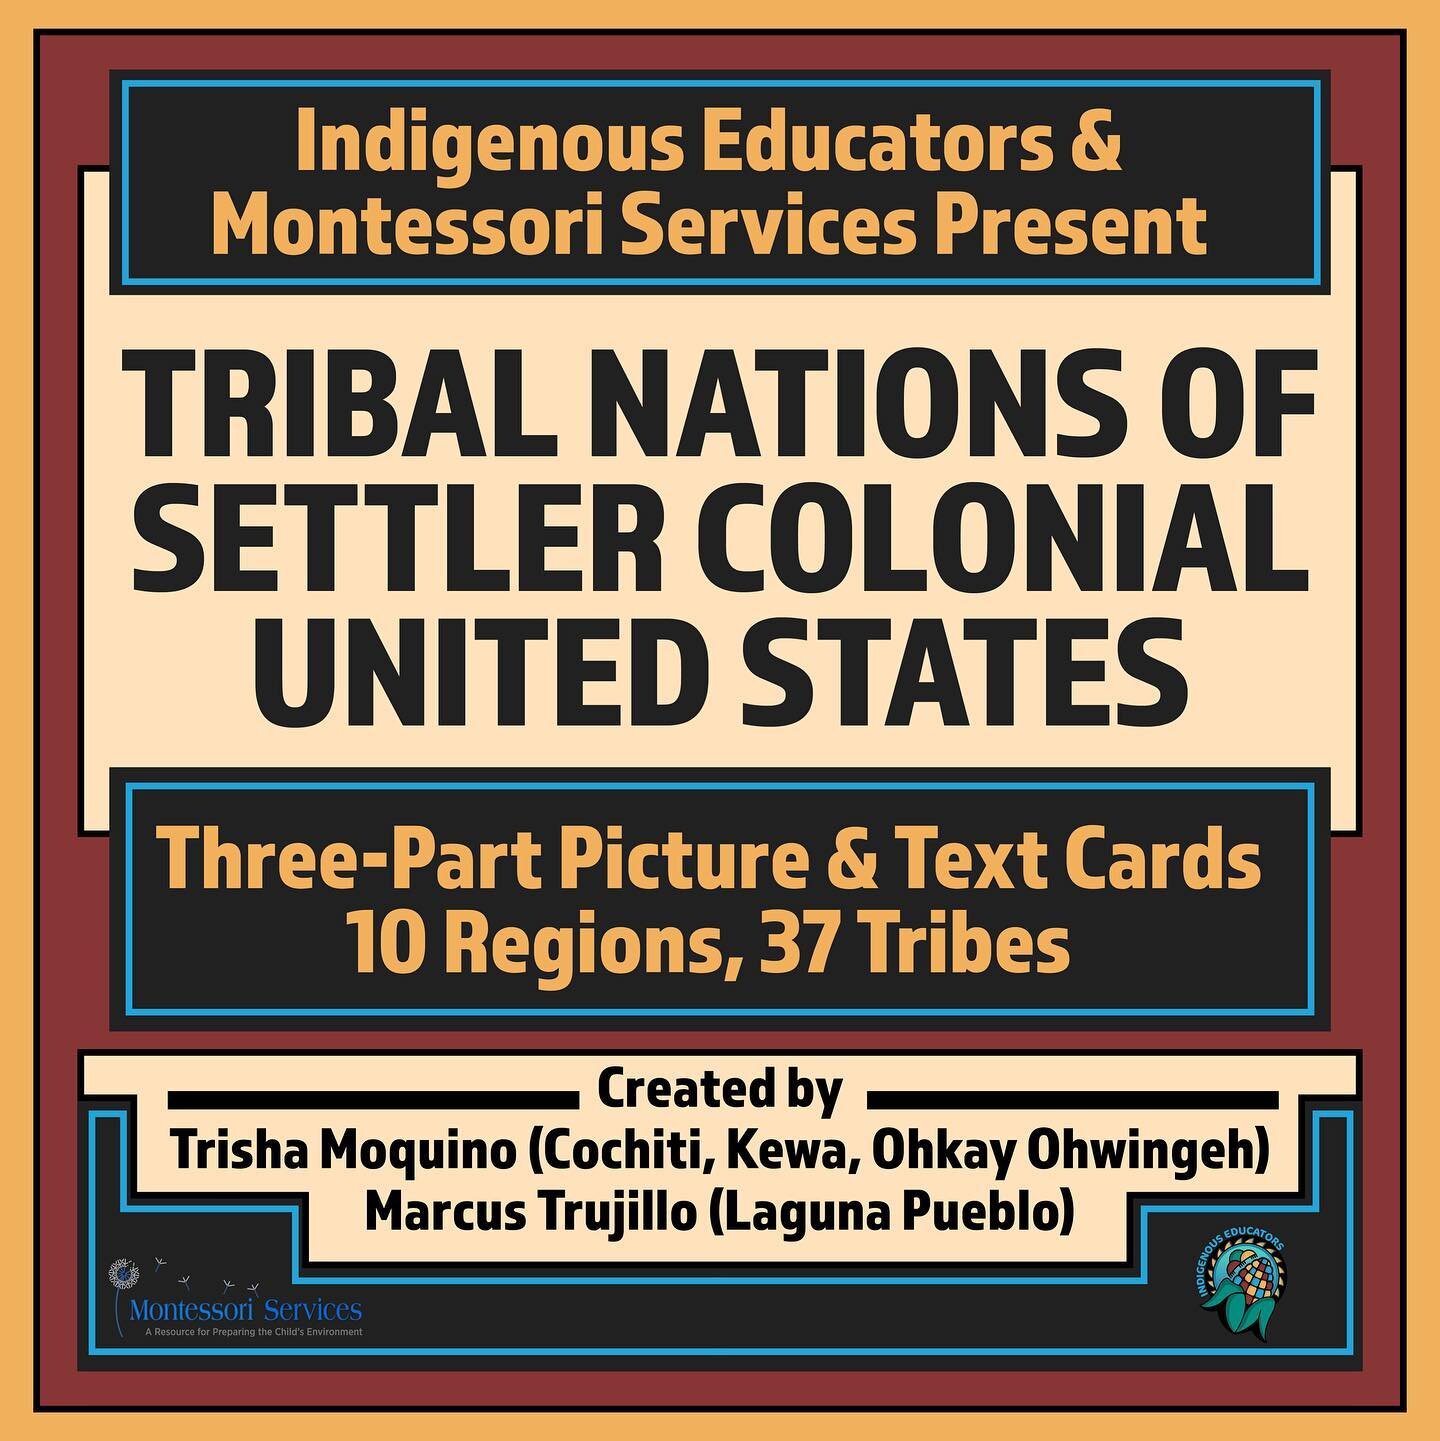 Tribal Nations of Colonial United States is now available! 

This project is led and designed by @indigenouscheerleader who I have had the honor in collaborating with through illustration and research - leading to the completion of this set. 

Thankf